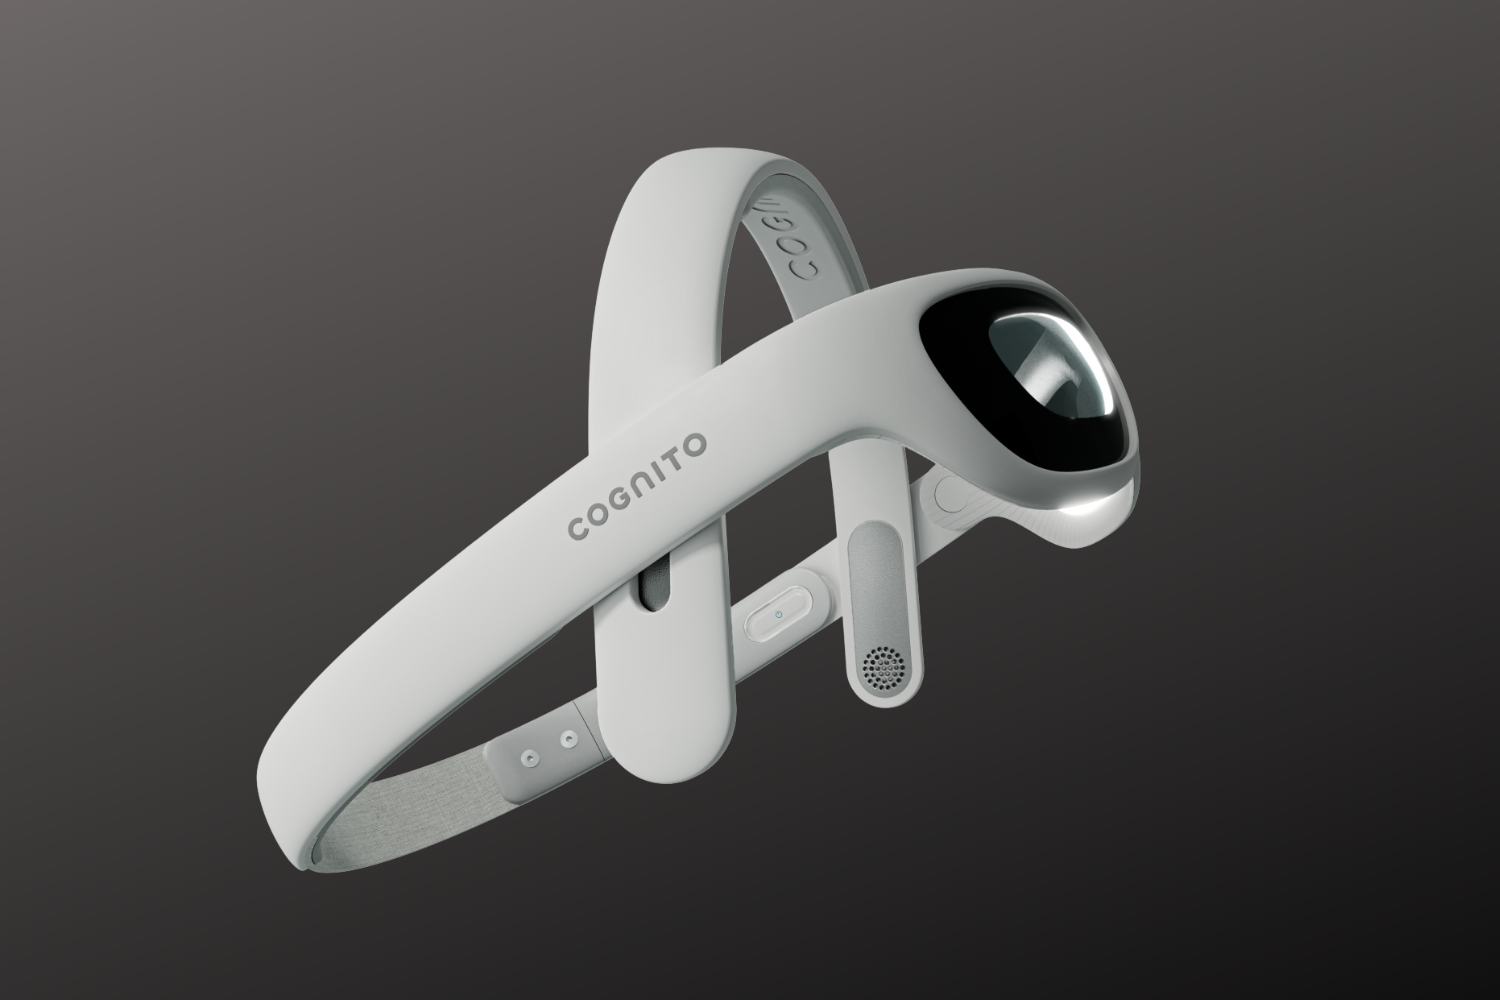 Cognito's headset device is designed to treat Alzheimer’s Disease with gamma frequency light and sound stimulation.